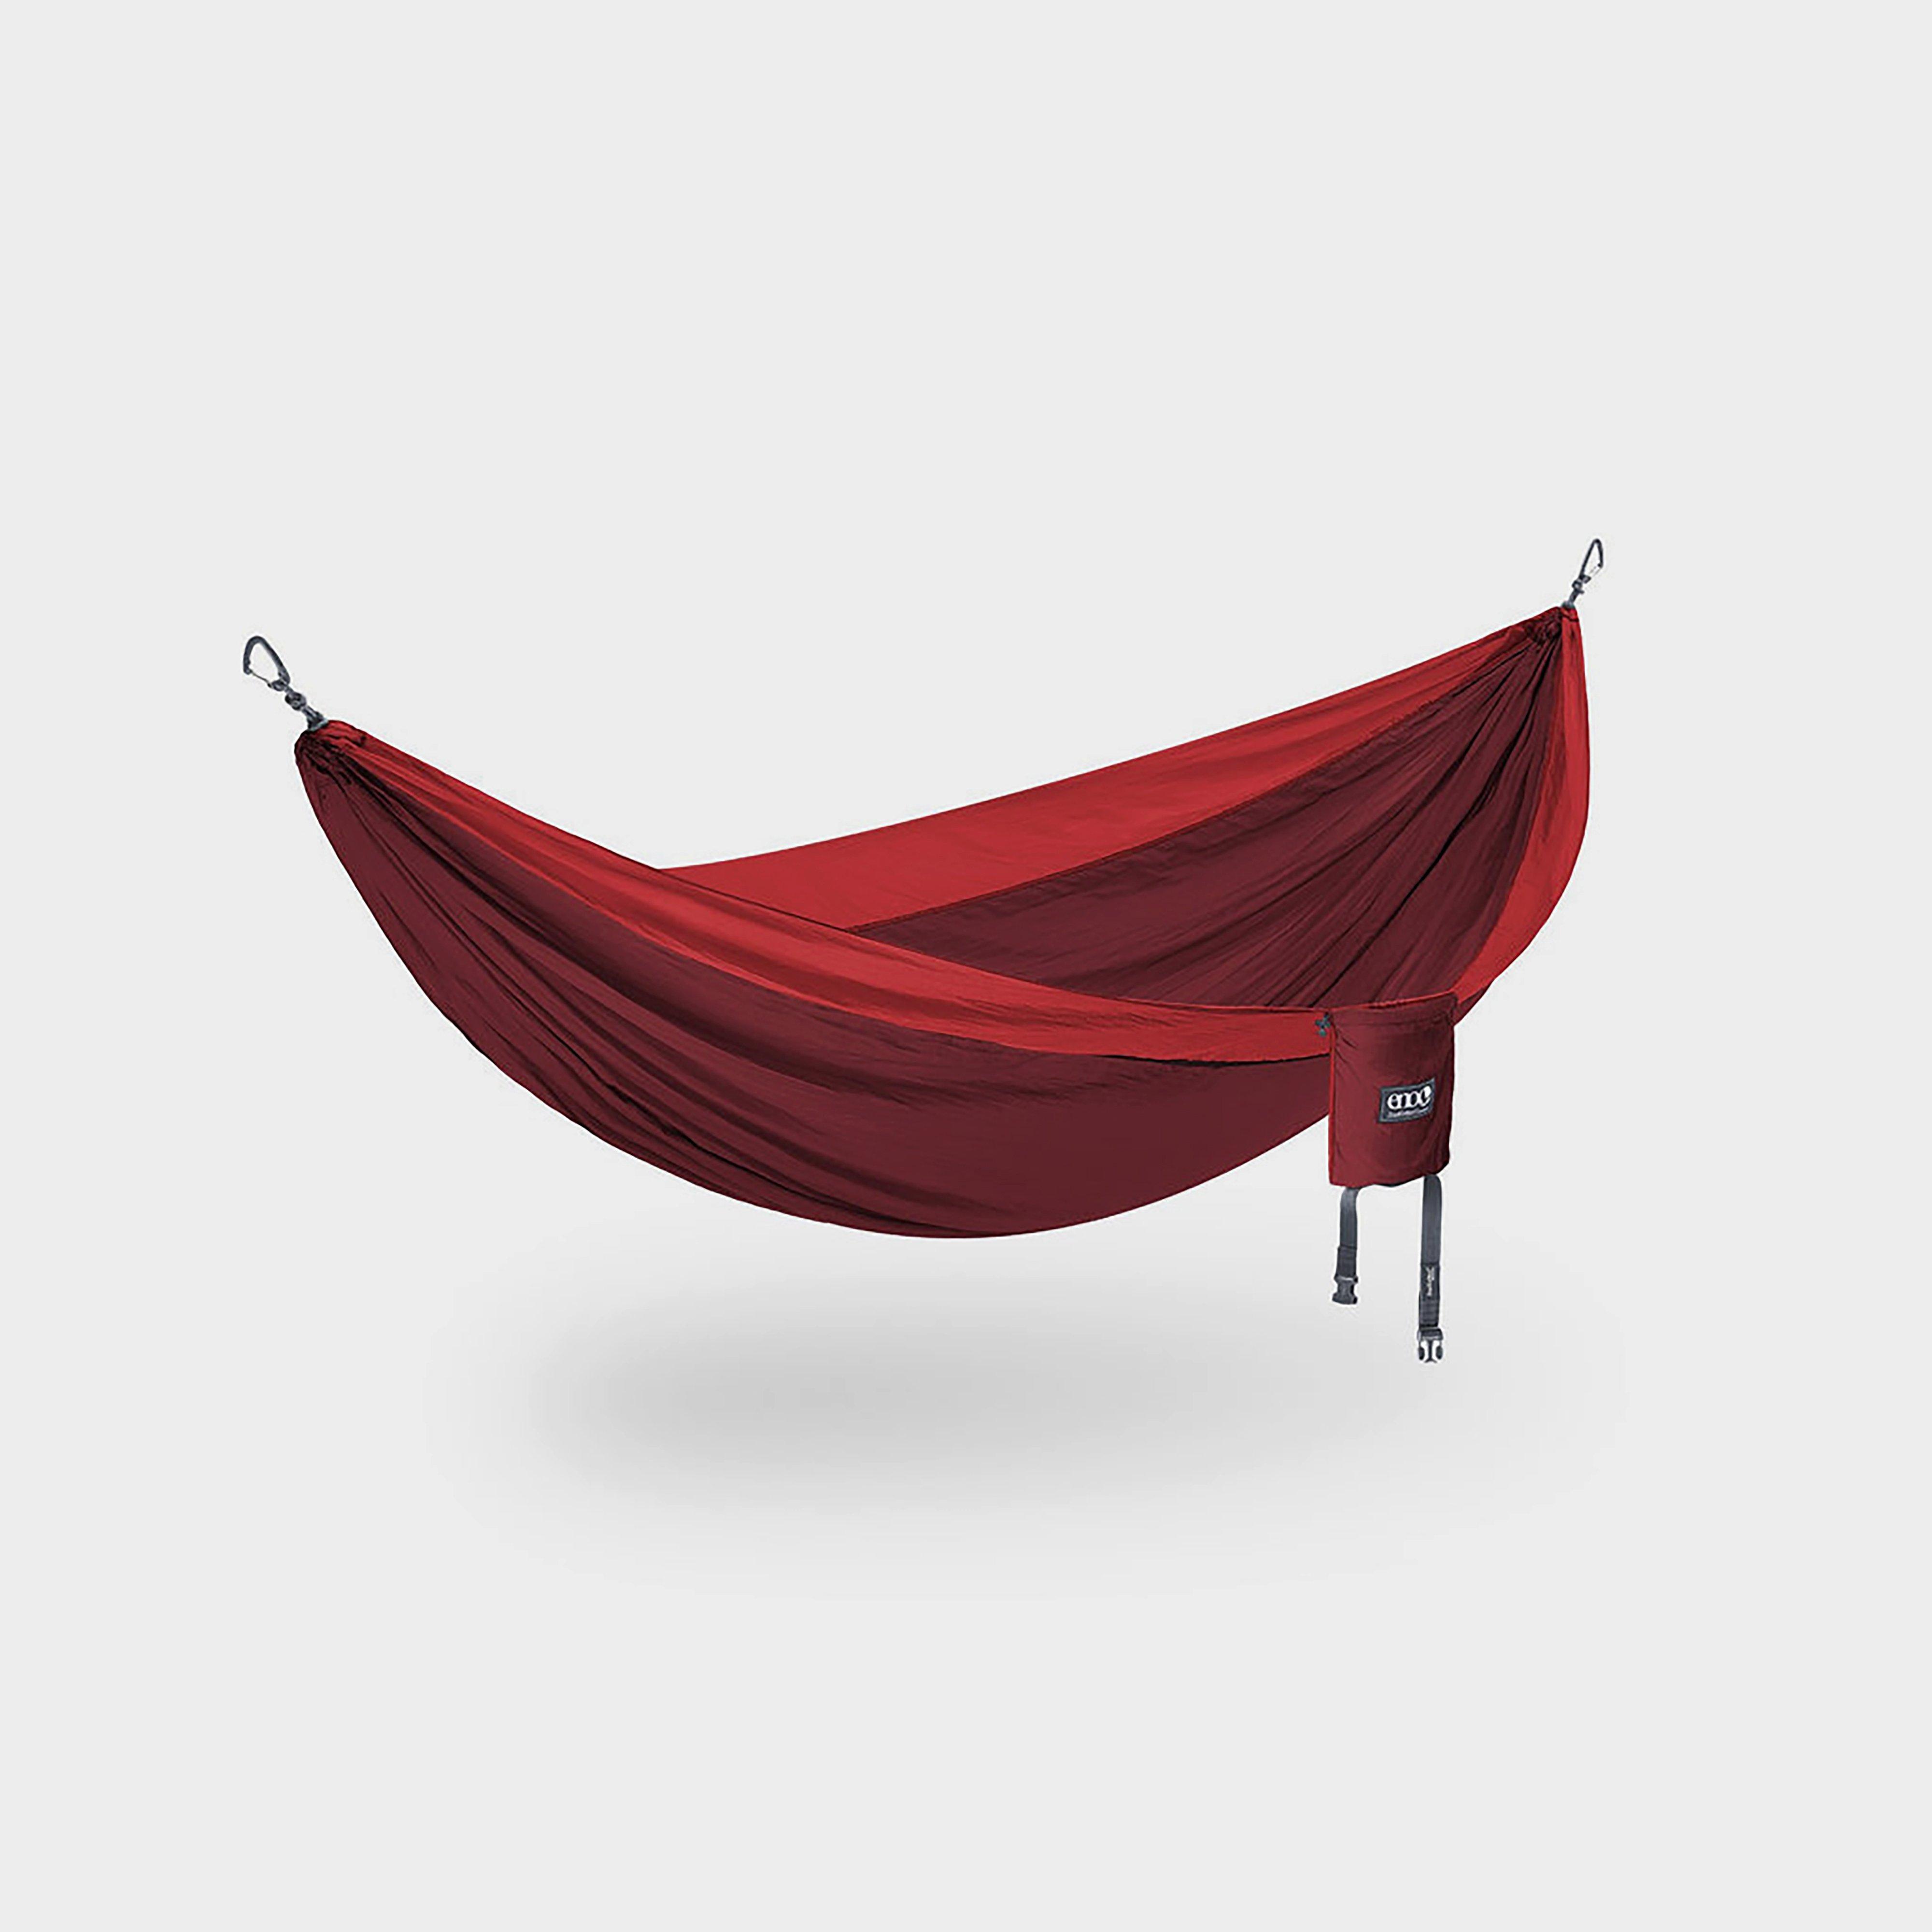 Eno Singlenest Hammock - Red/red  Red/red